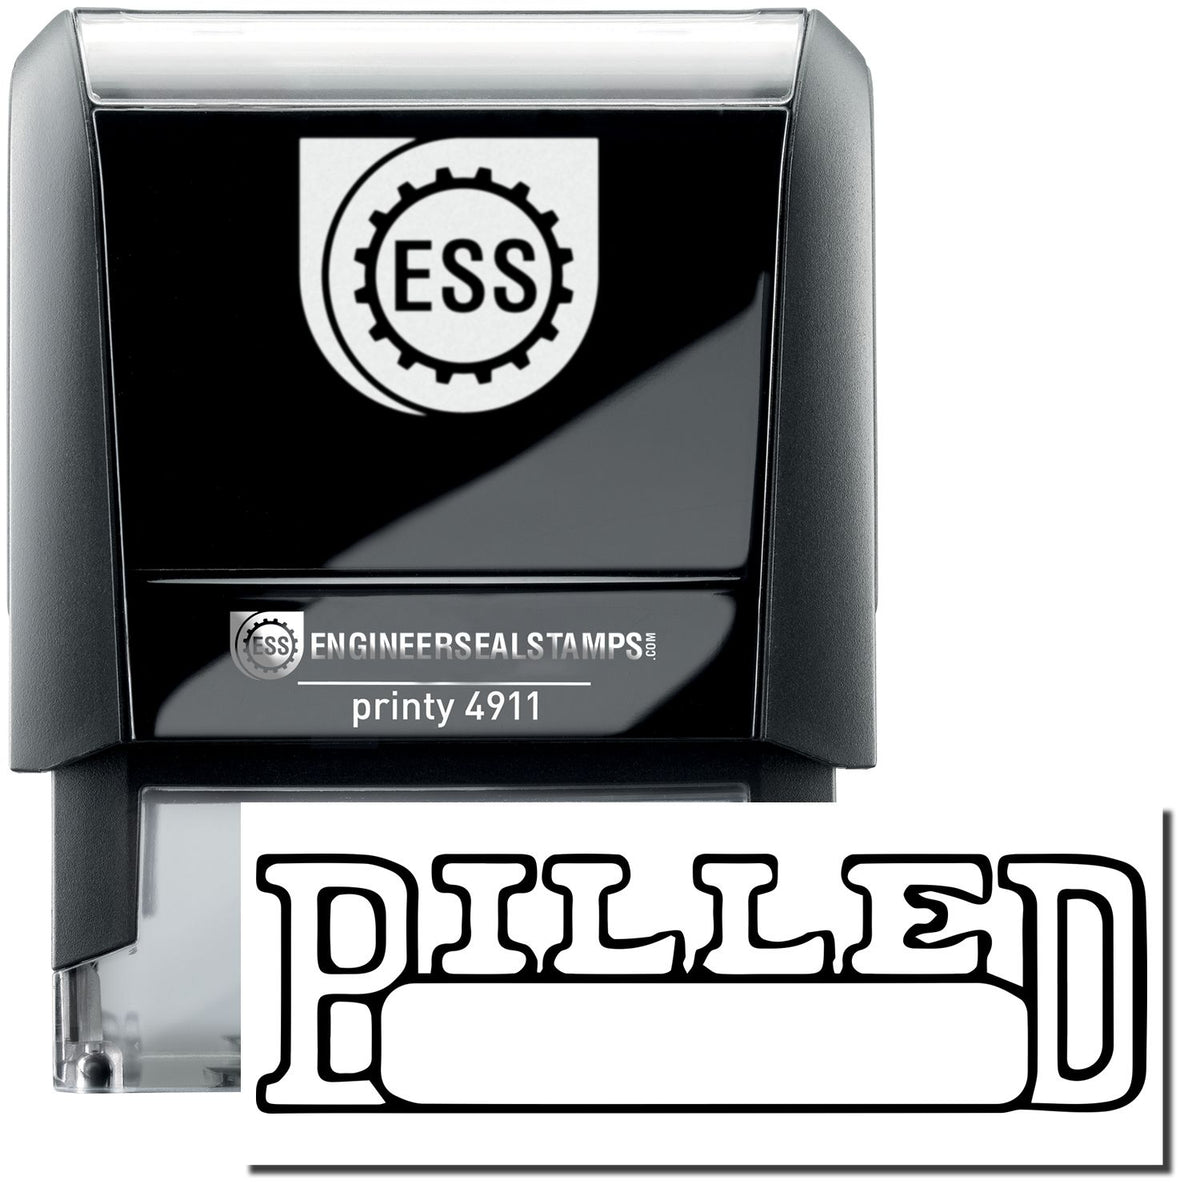 A self-inking stamp with a stamped image showing how the text &quot;BILLED&quot; in an outline font with a date box underneath is displayed after stamping.